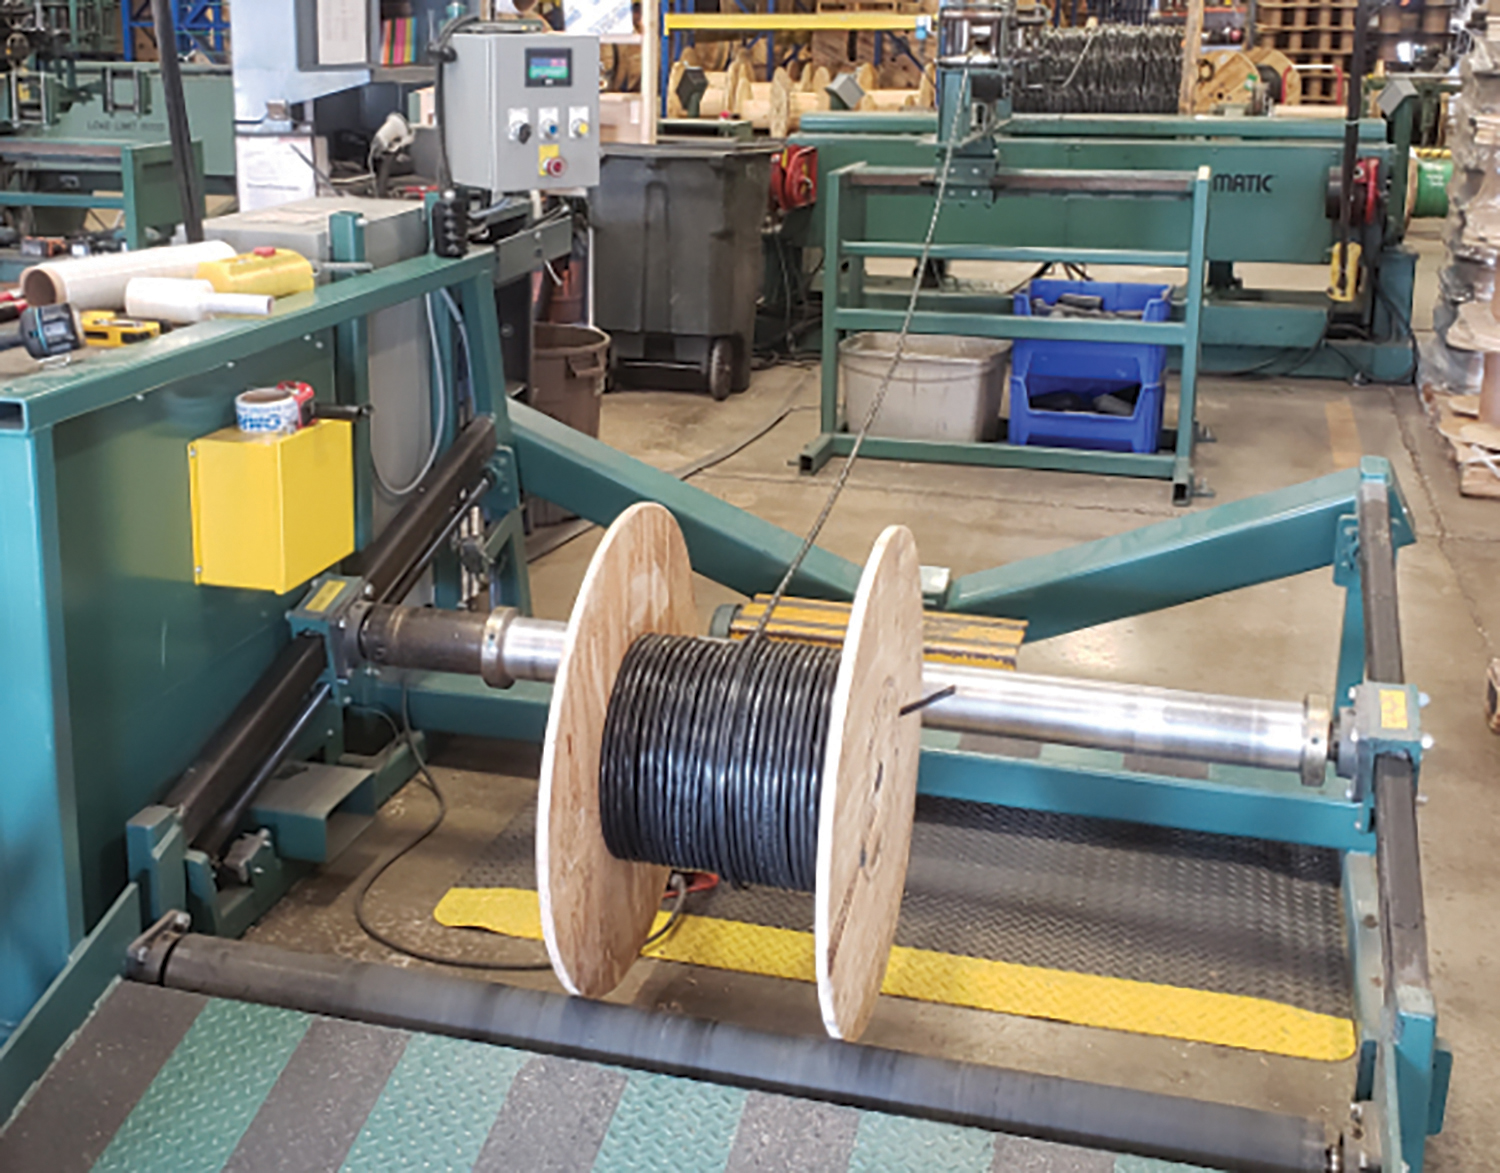 Reel Power Industrial’s RD line is used by wire and cable distribution facilities to transfer large spools of copper wire down to smaller reels for contractor use.